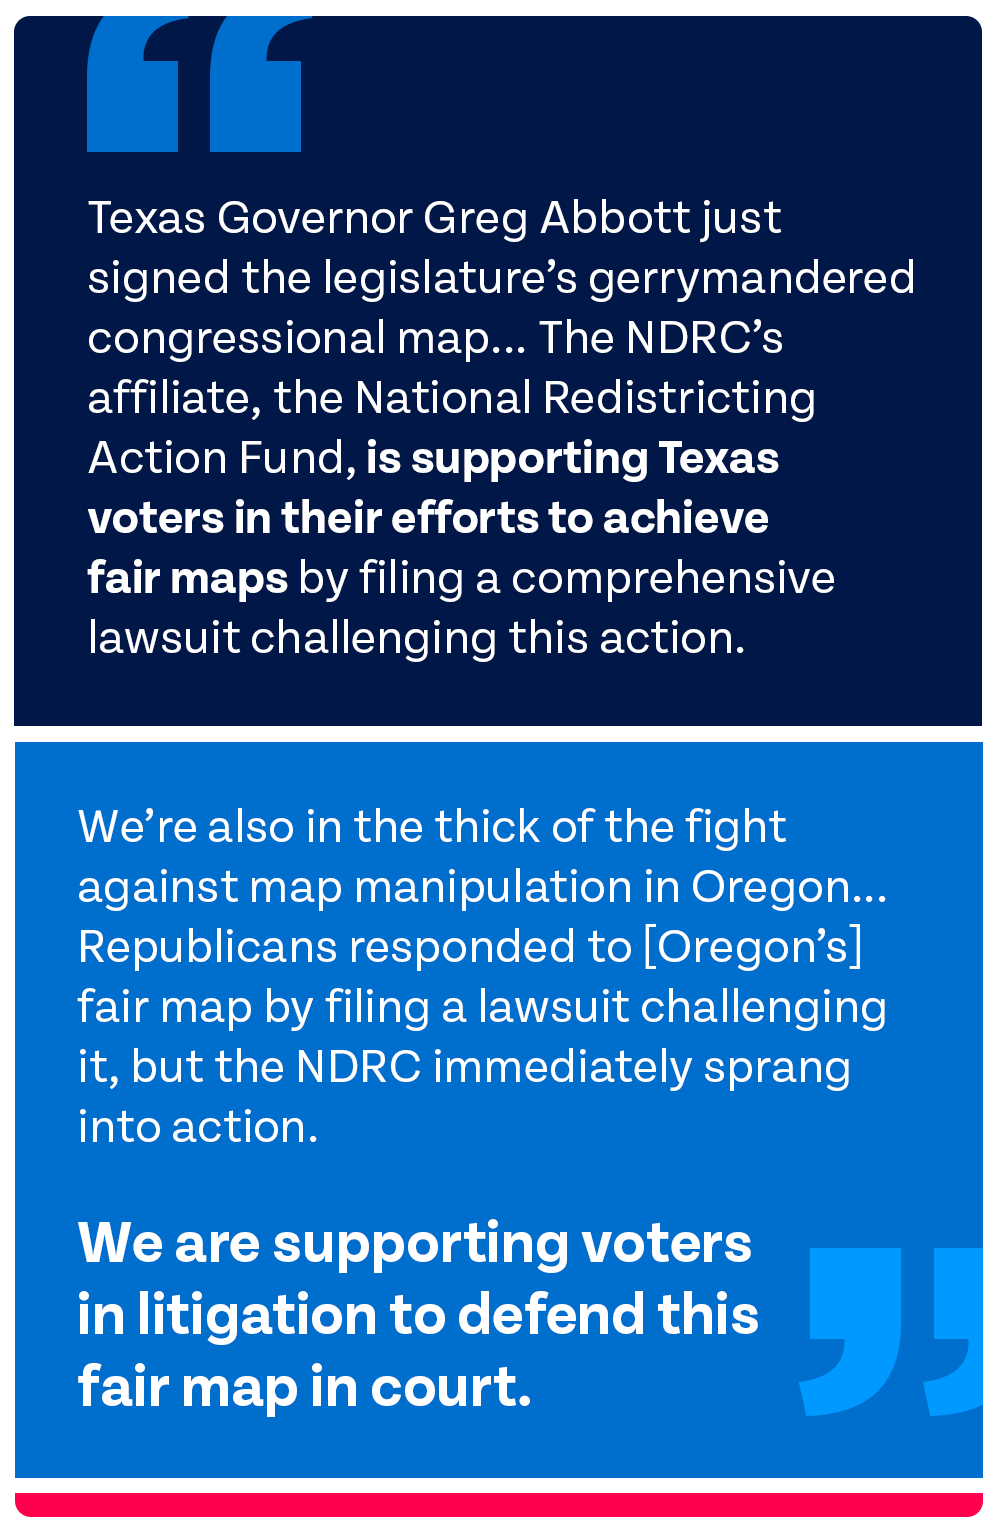 A.G. Holder: 'Texas Governor Greg Abbott just signed the legislature's gerrymandered congressional map... The NDRC’s affiliate, the National Redistricting Action Fund, is supporting Texas voters in their efforts to achieve fair maps by filing a comprehensive lawsuit challenging this action. We’re also in the thick of the fight against map manipulation in Oregon... Republicans responded to [Oregon's] fair map by filing a lawsuit challenging it, but the NDRC immediately sprang into action. We are supporting voters in litigation to defend this fair map in court.'